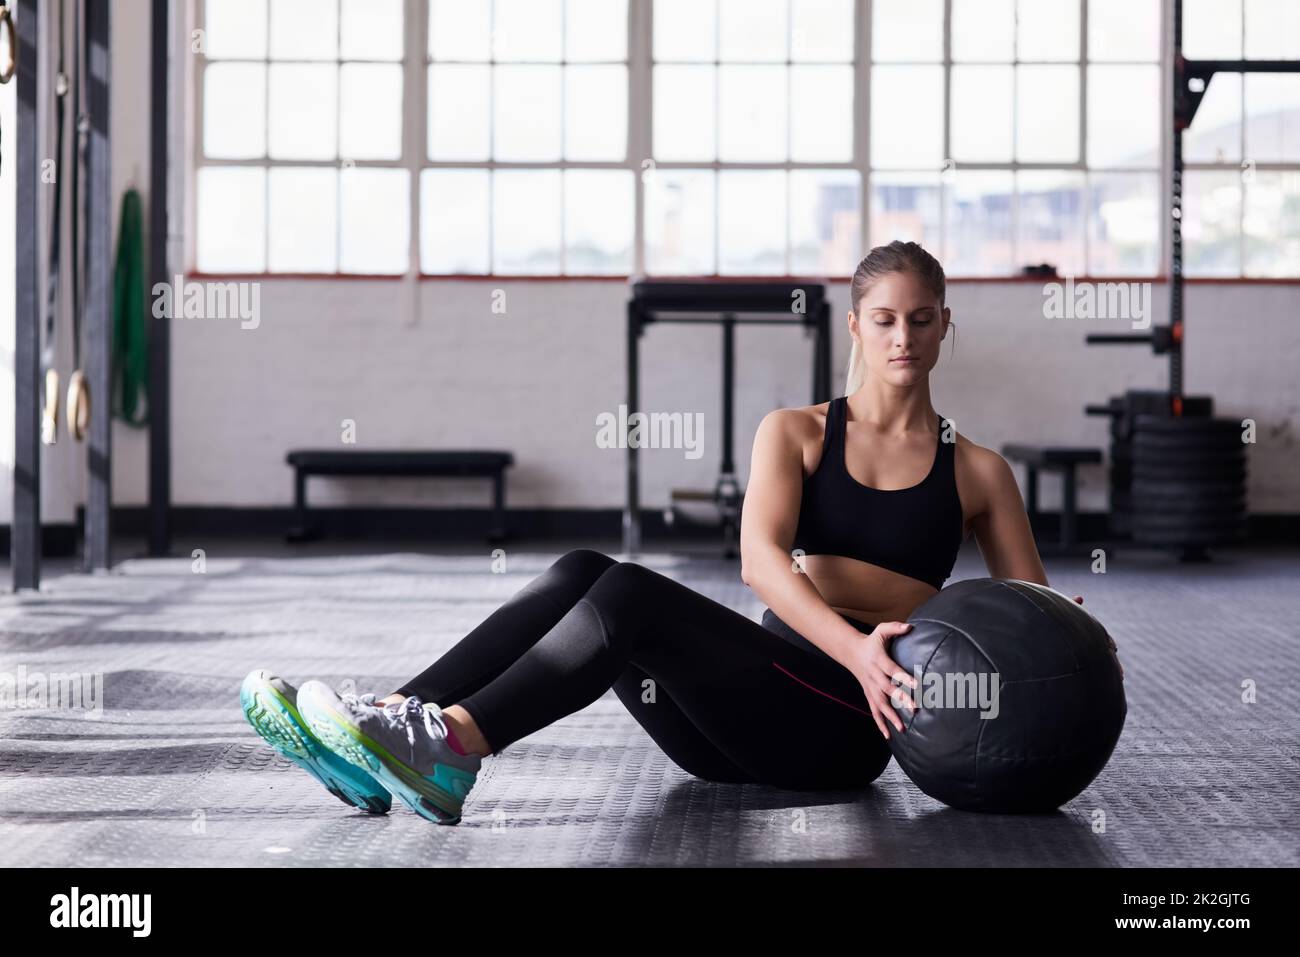 Are you looking for a great stomach toning workout. Shot of a young woman using a medicine ball in an exercise routine. Stock Photo